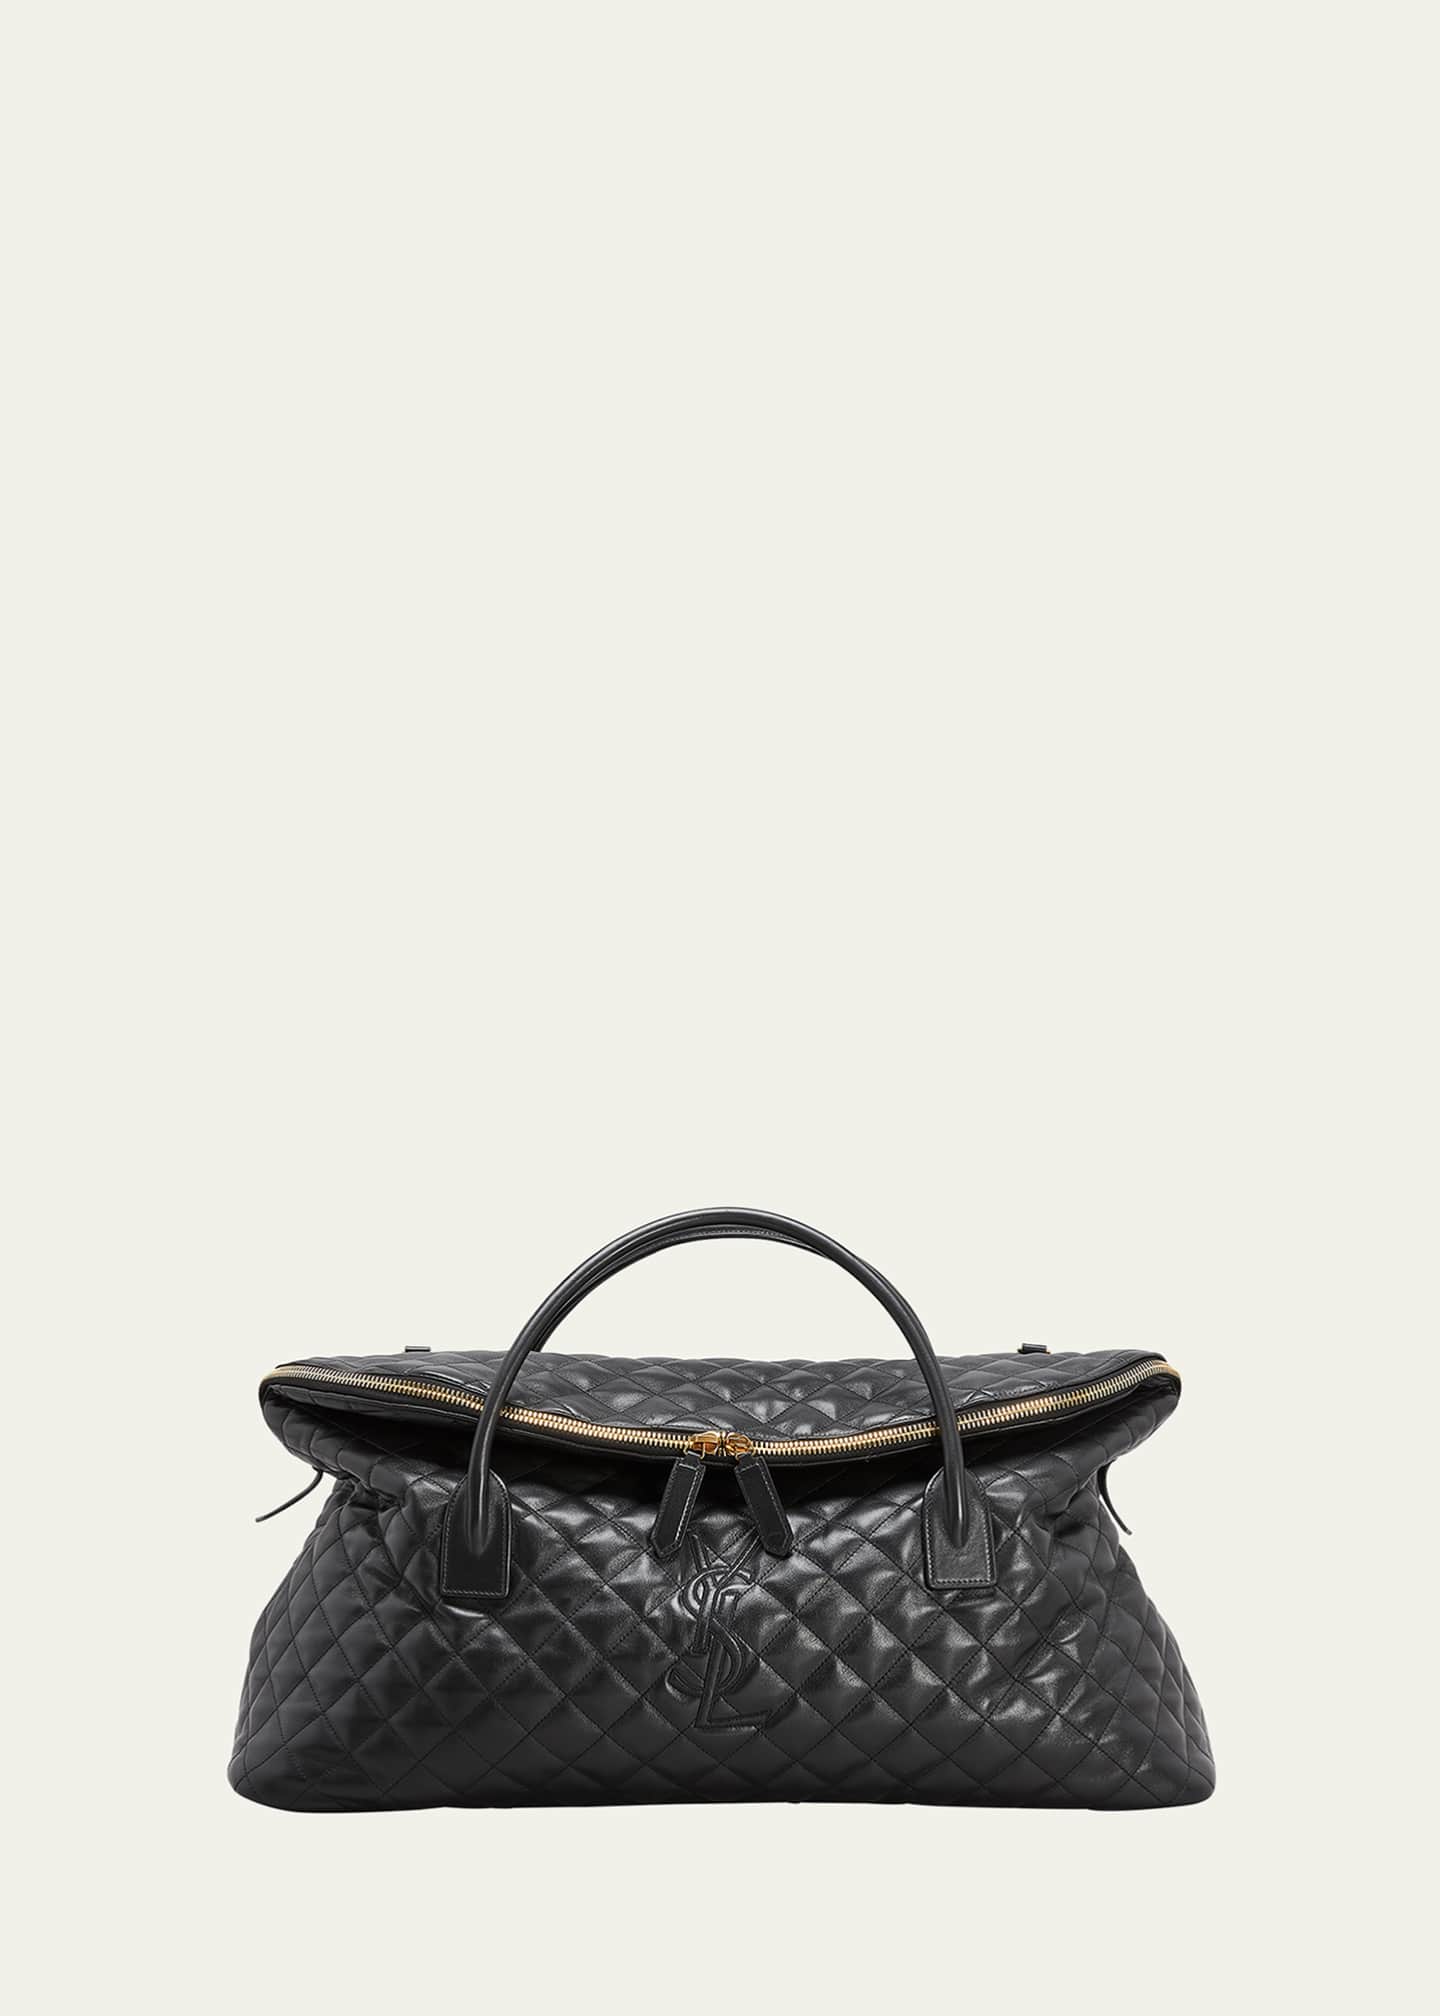 Saint Laurent Es Giant YSL Travel Bag in Smooth Quilted Leather Image 1 of 5